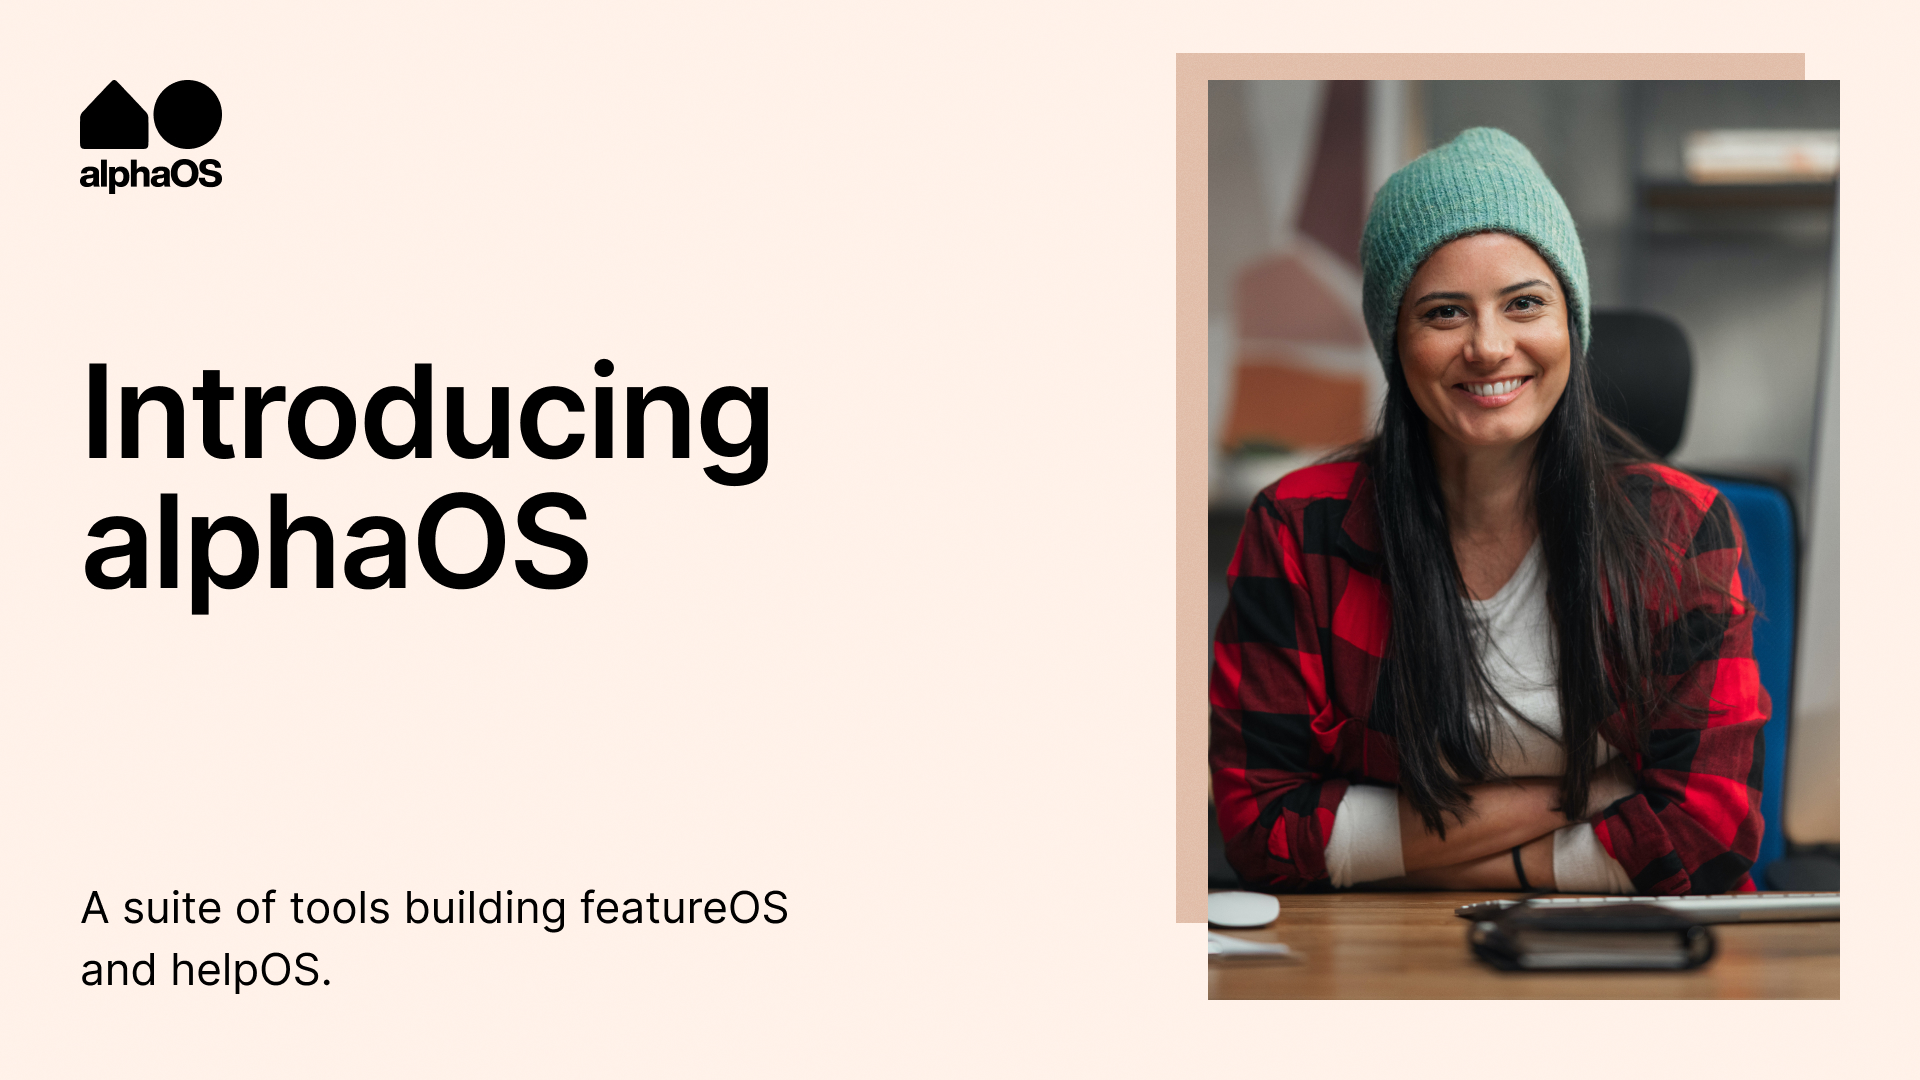 Introducing alphaOS: Suite of Tools for Product Managers